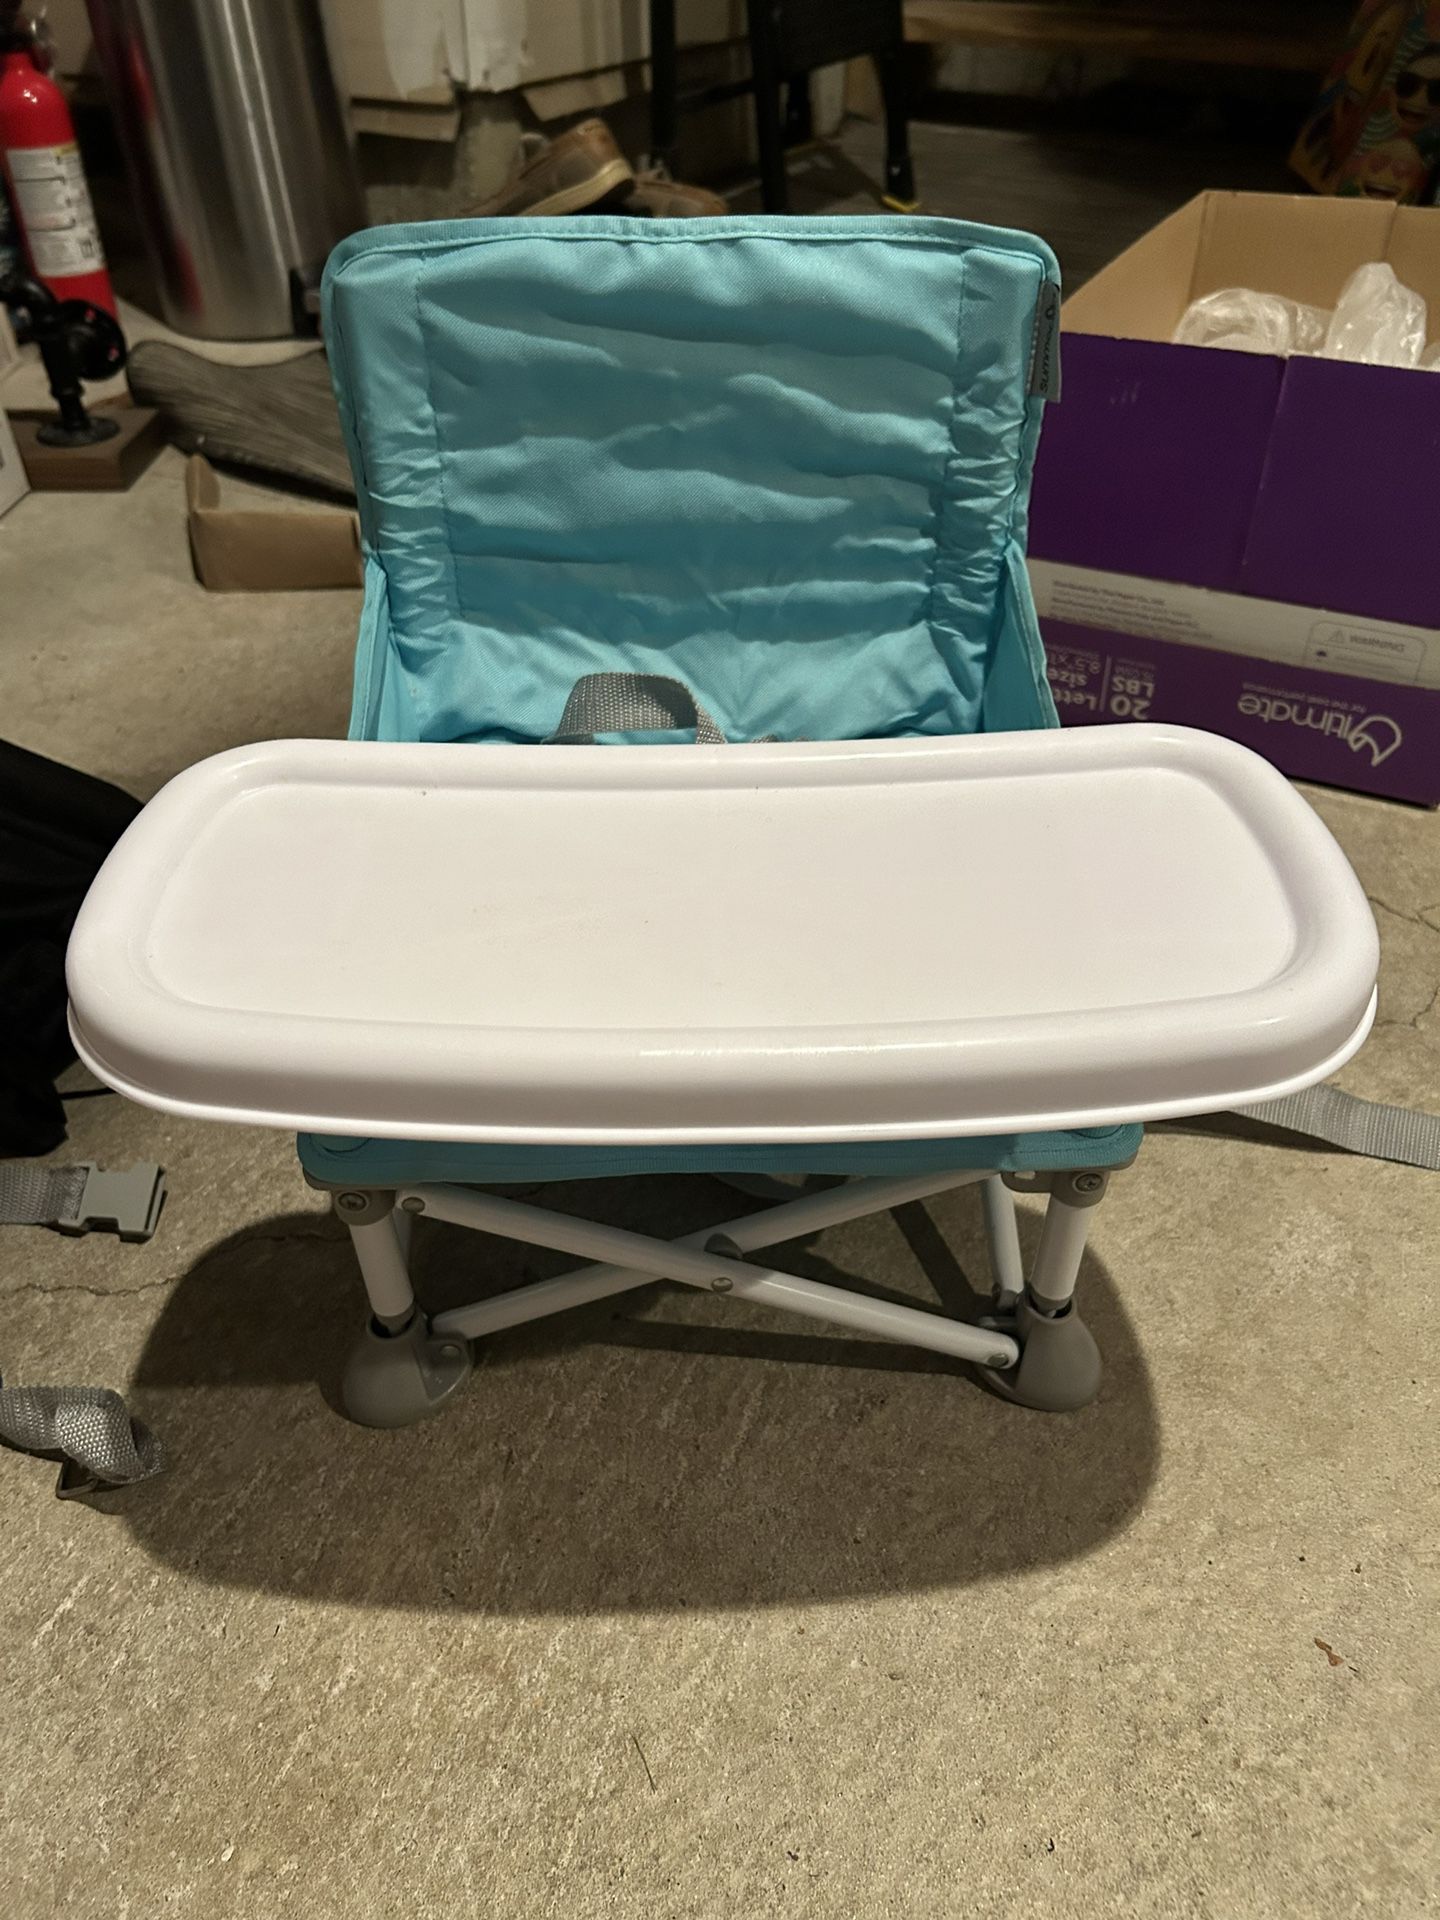 Collapsible High chair